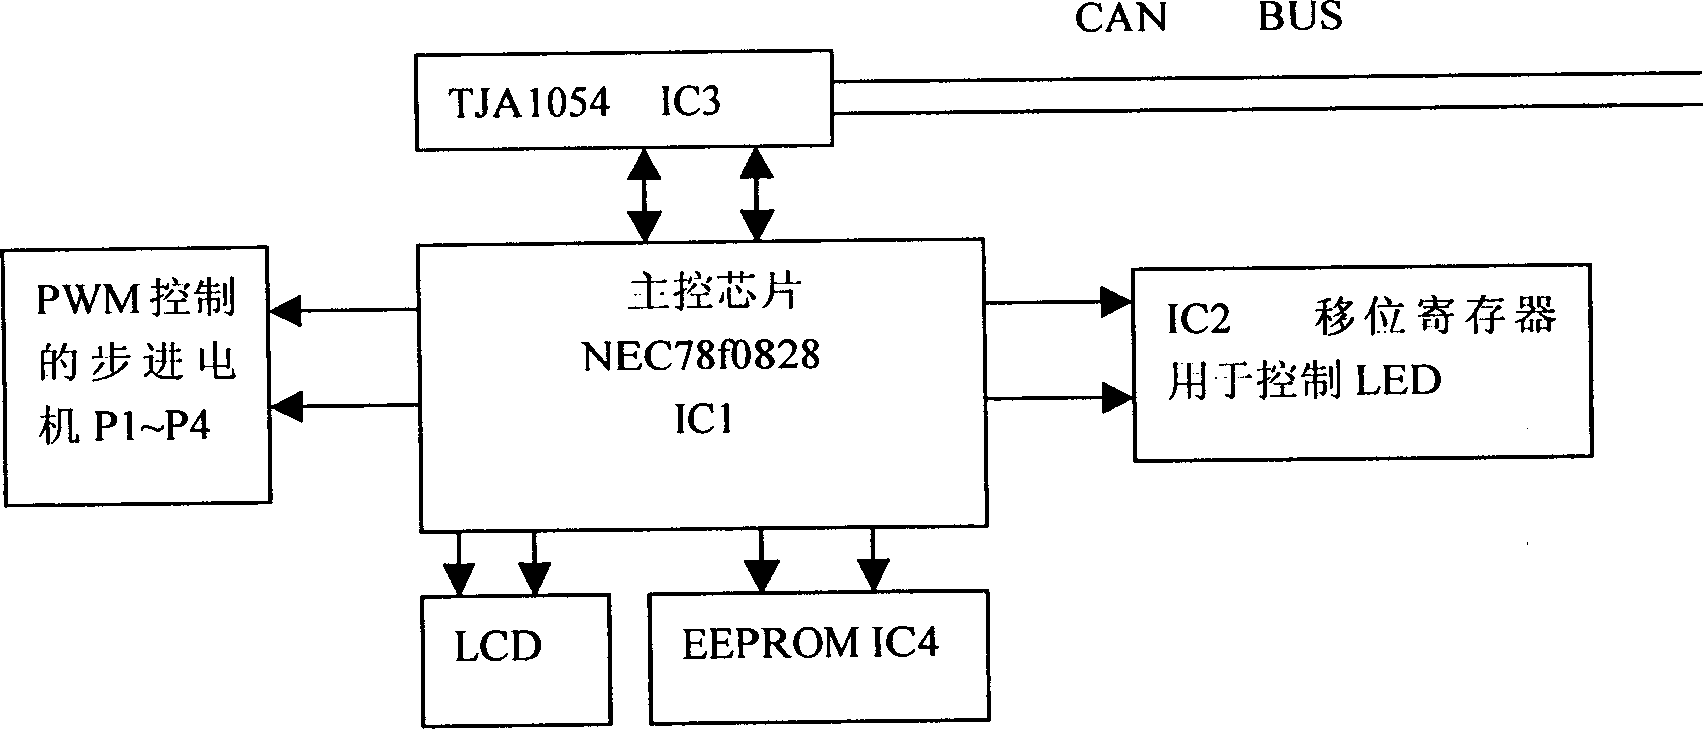 Controller local network bus and electronic assembled instrument set of vehicle and data processing mode